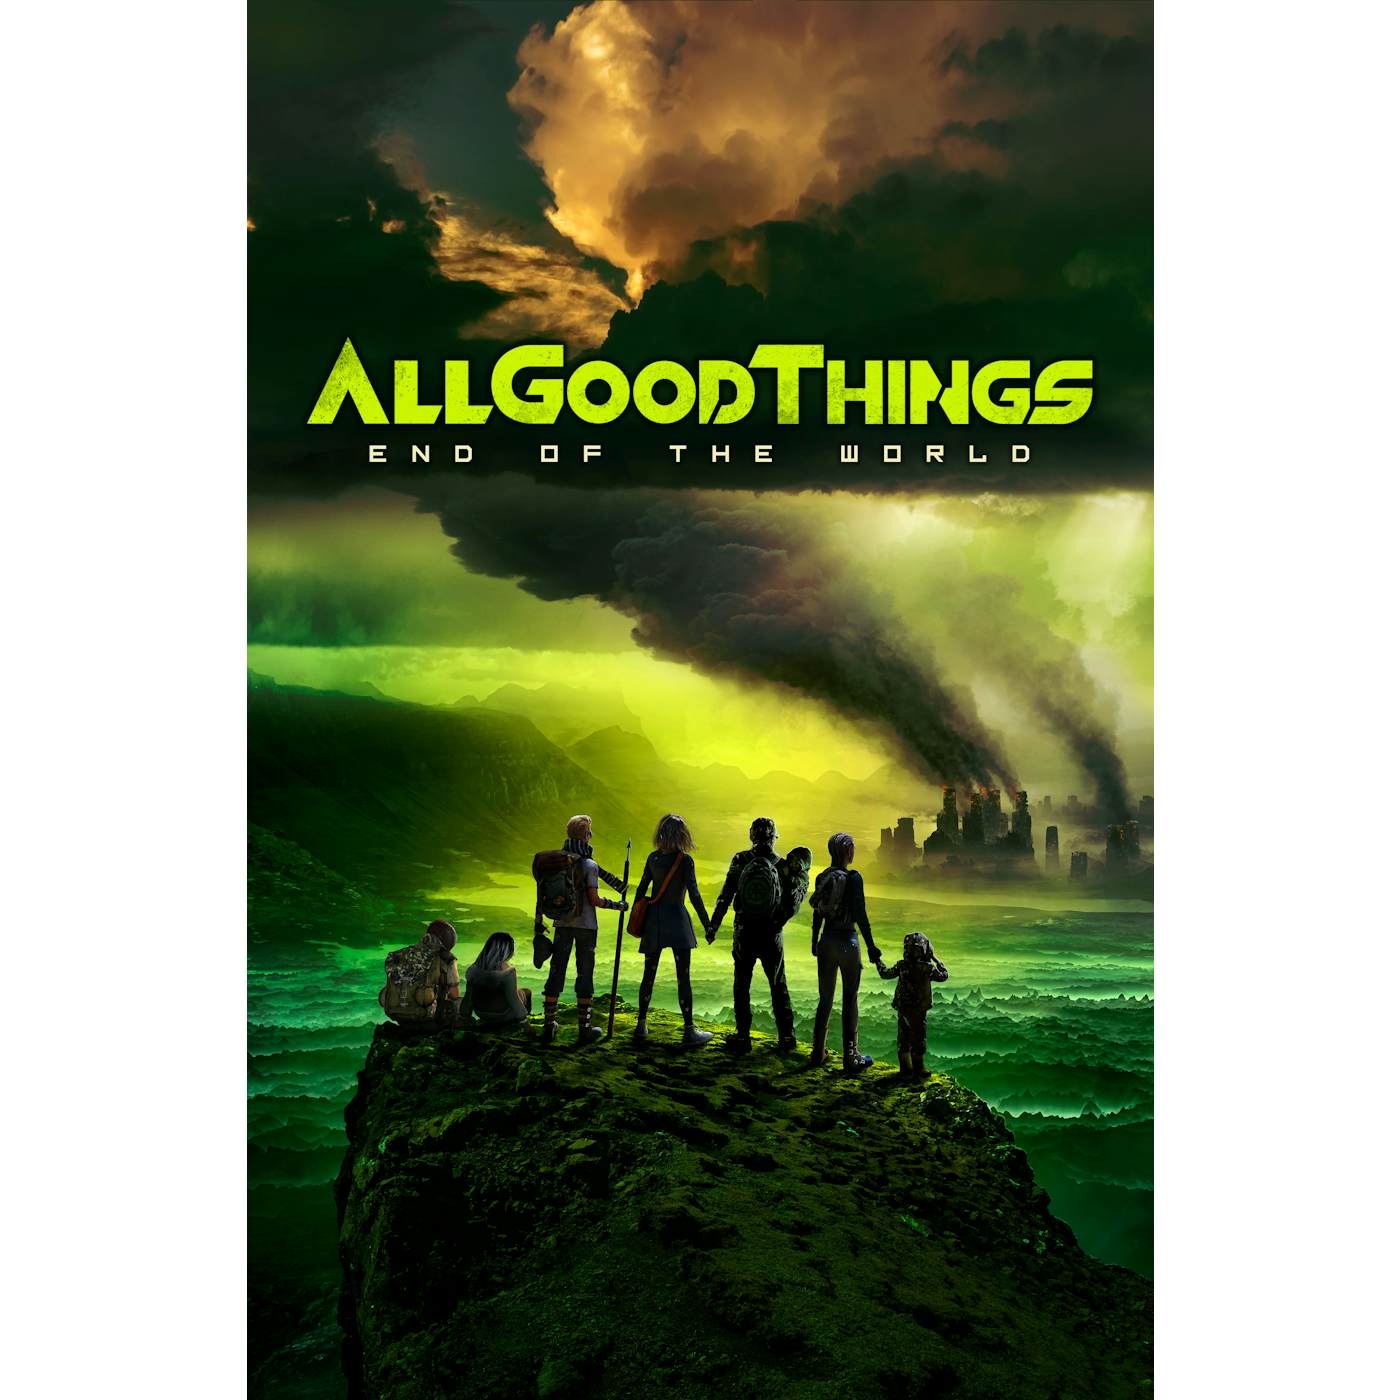 ALL GOOD THINGS - "END OF THE WORLD" POSTER **SIGNED**